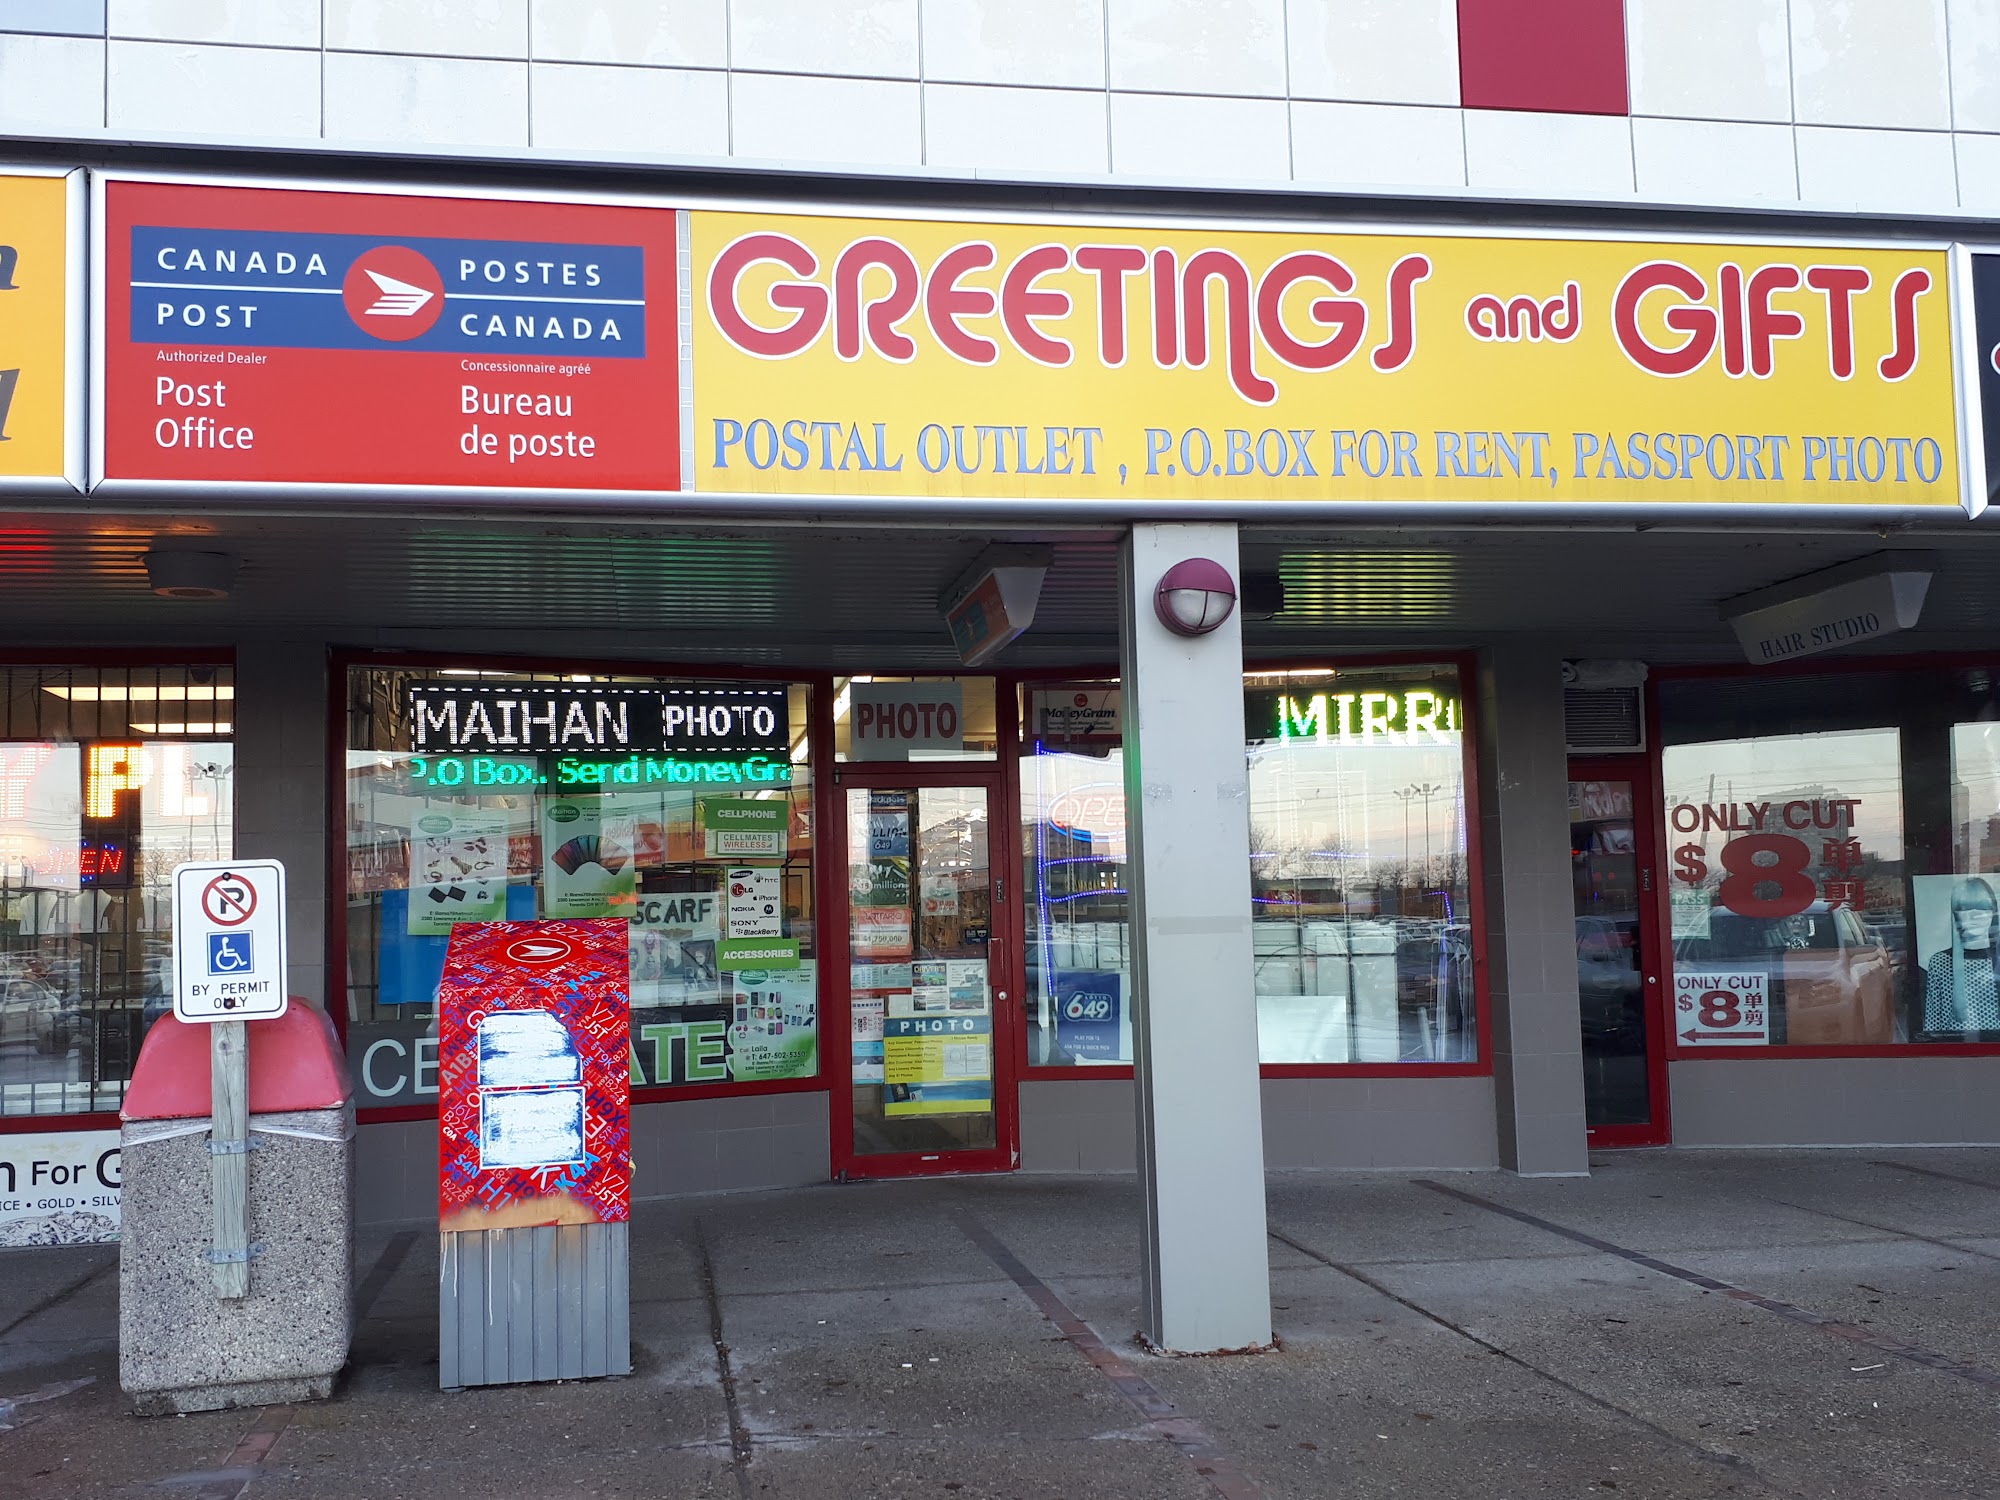 Greetings & Gifts Post Outlet